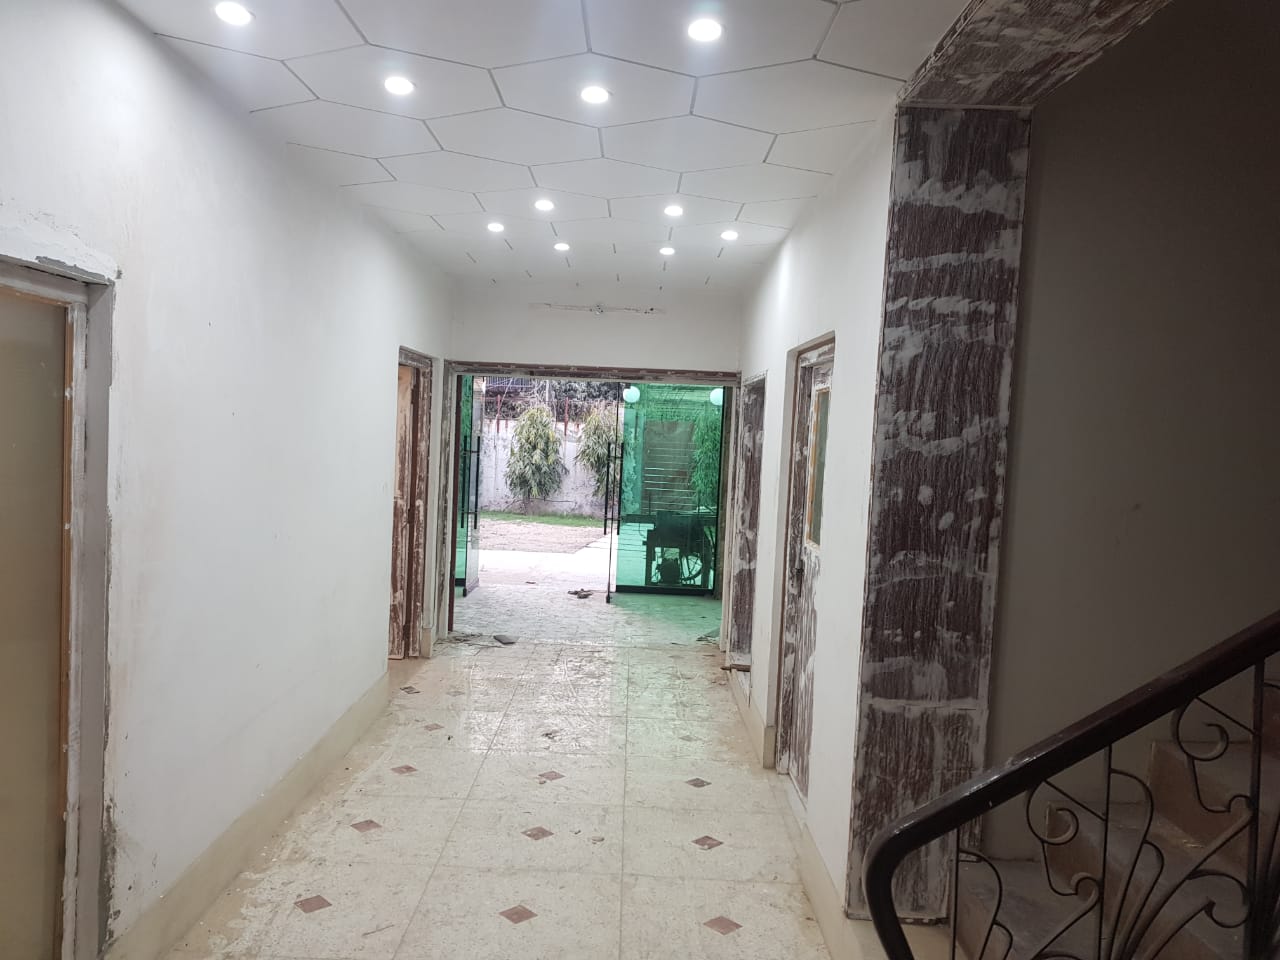 27 Marla Corner Semi Commercial Building for Rent At Peoples Colony, Faisalabad